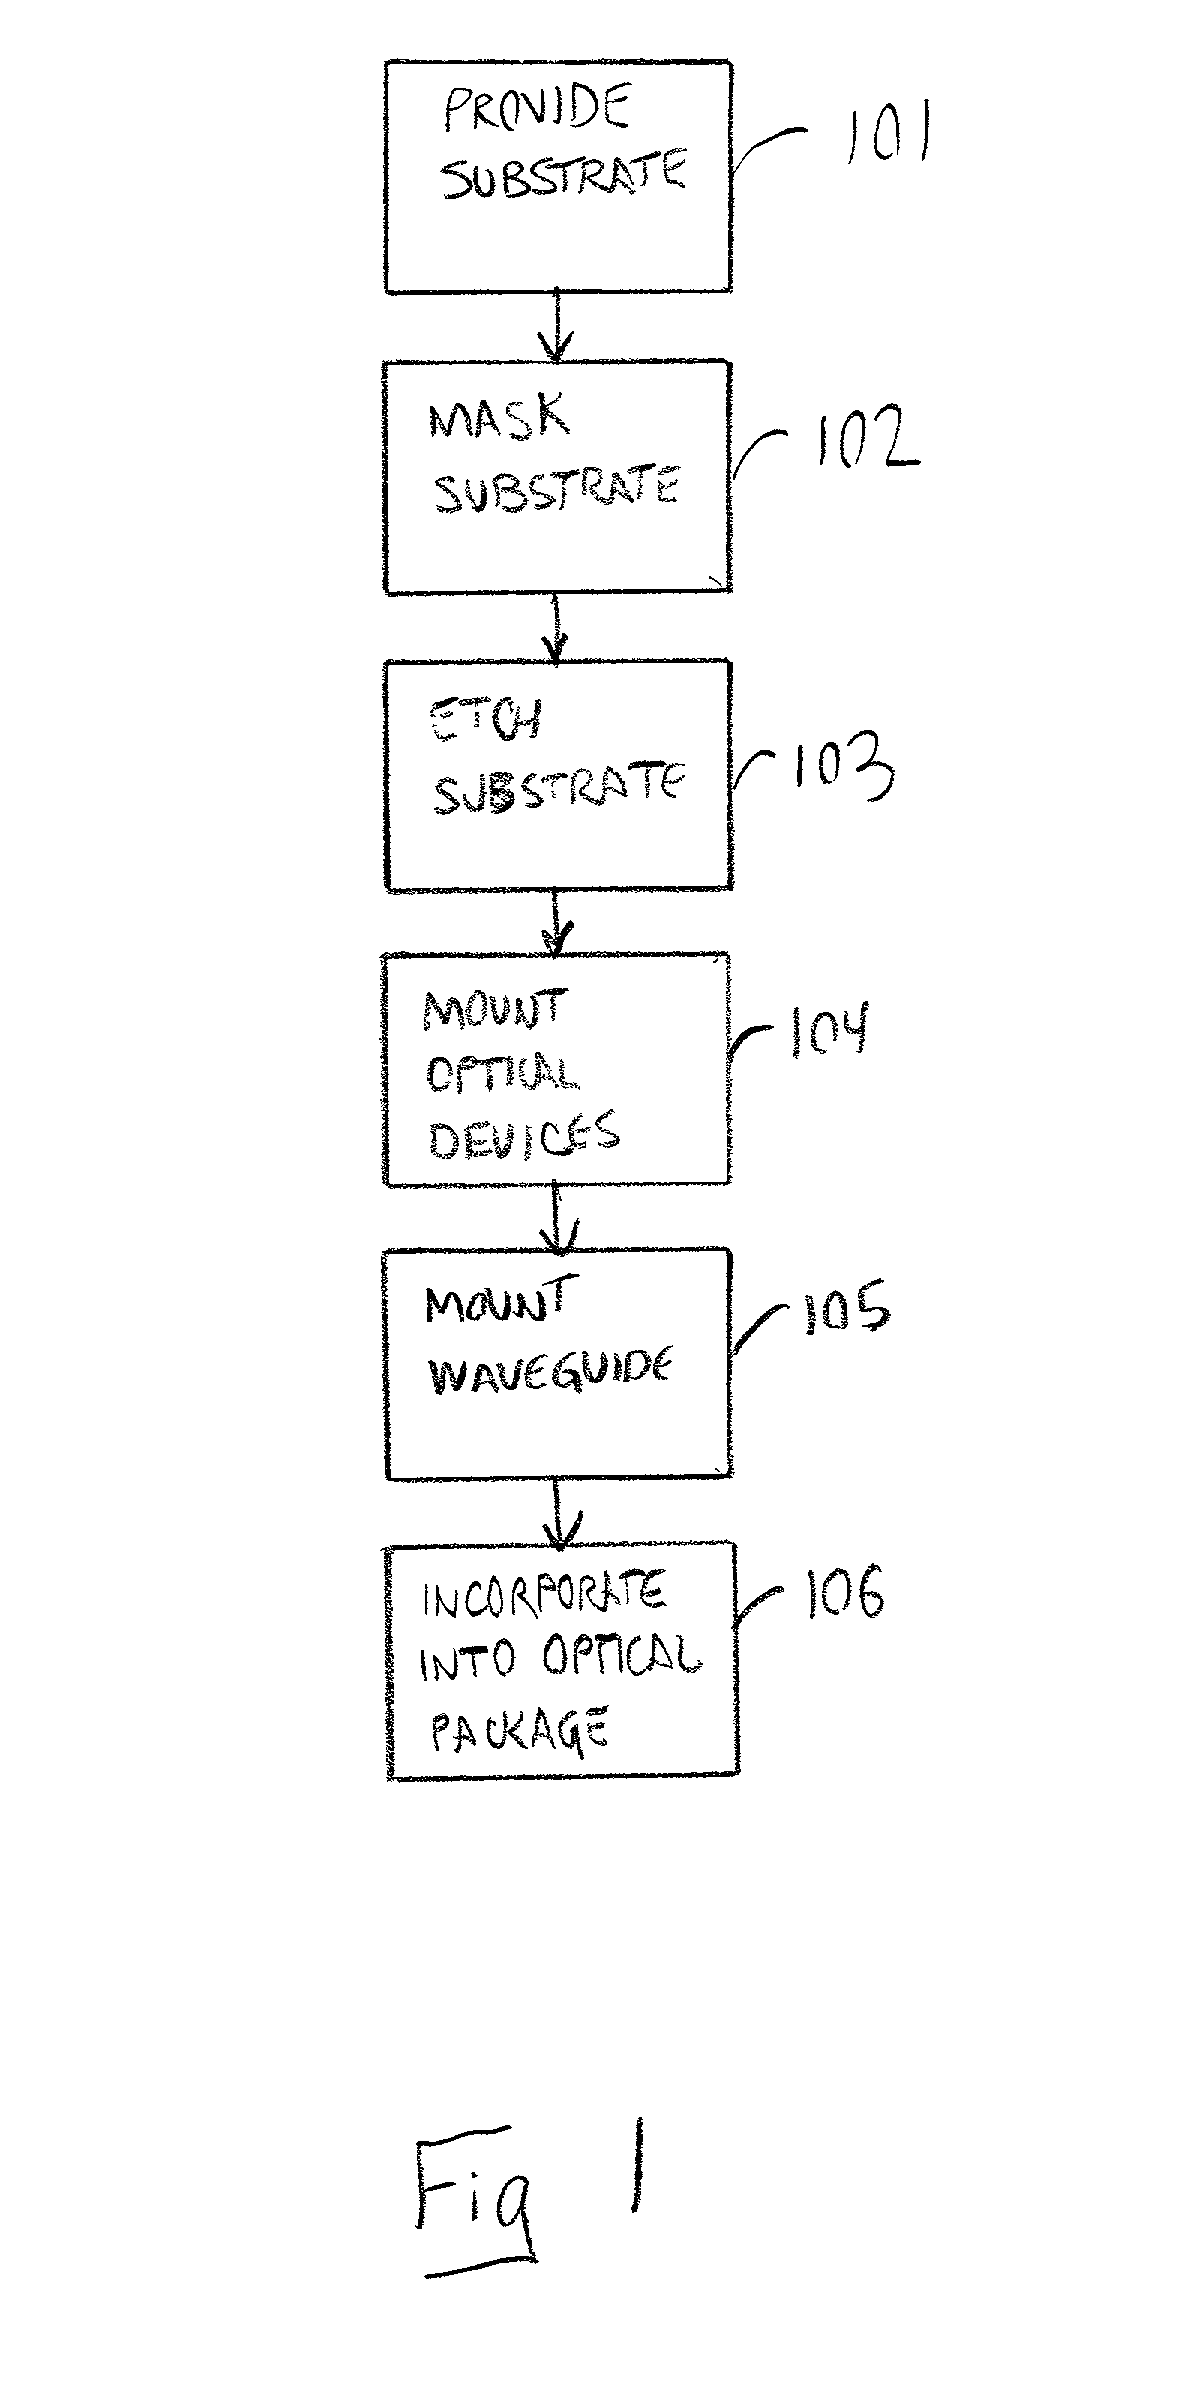 Optical substrate having alignment fiducials